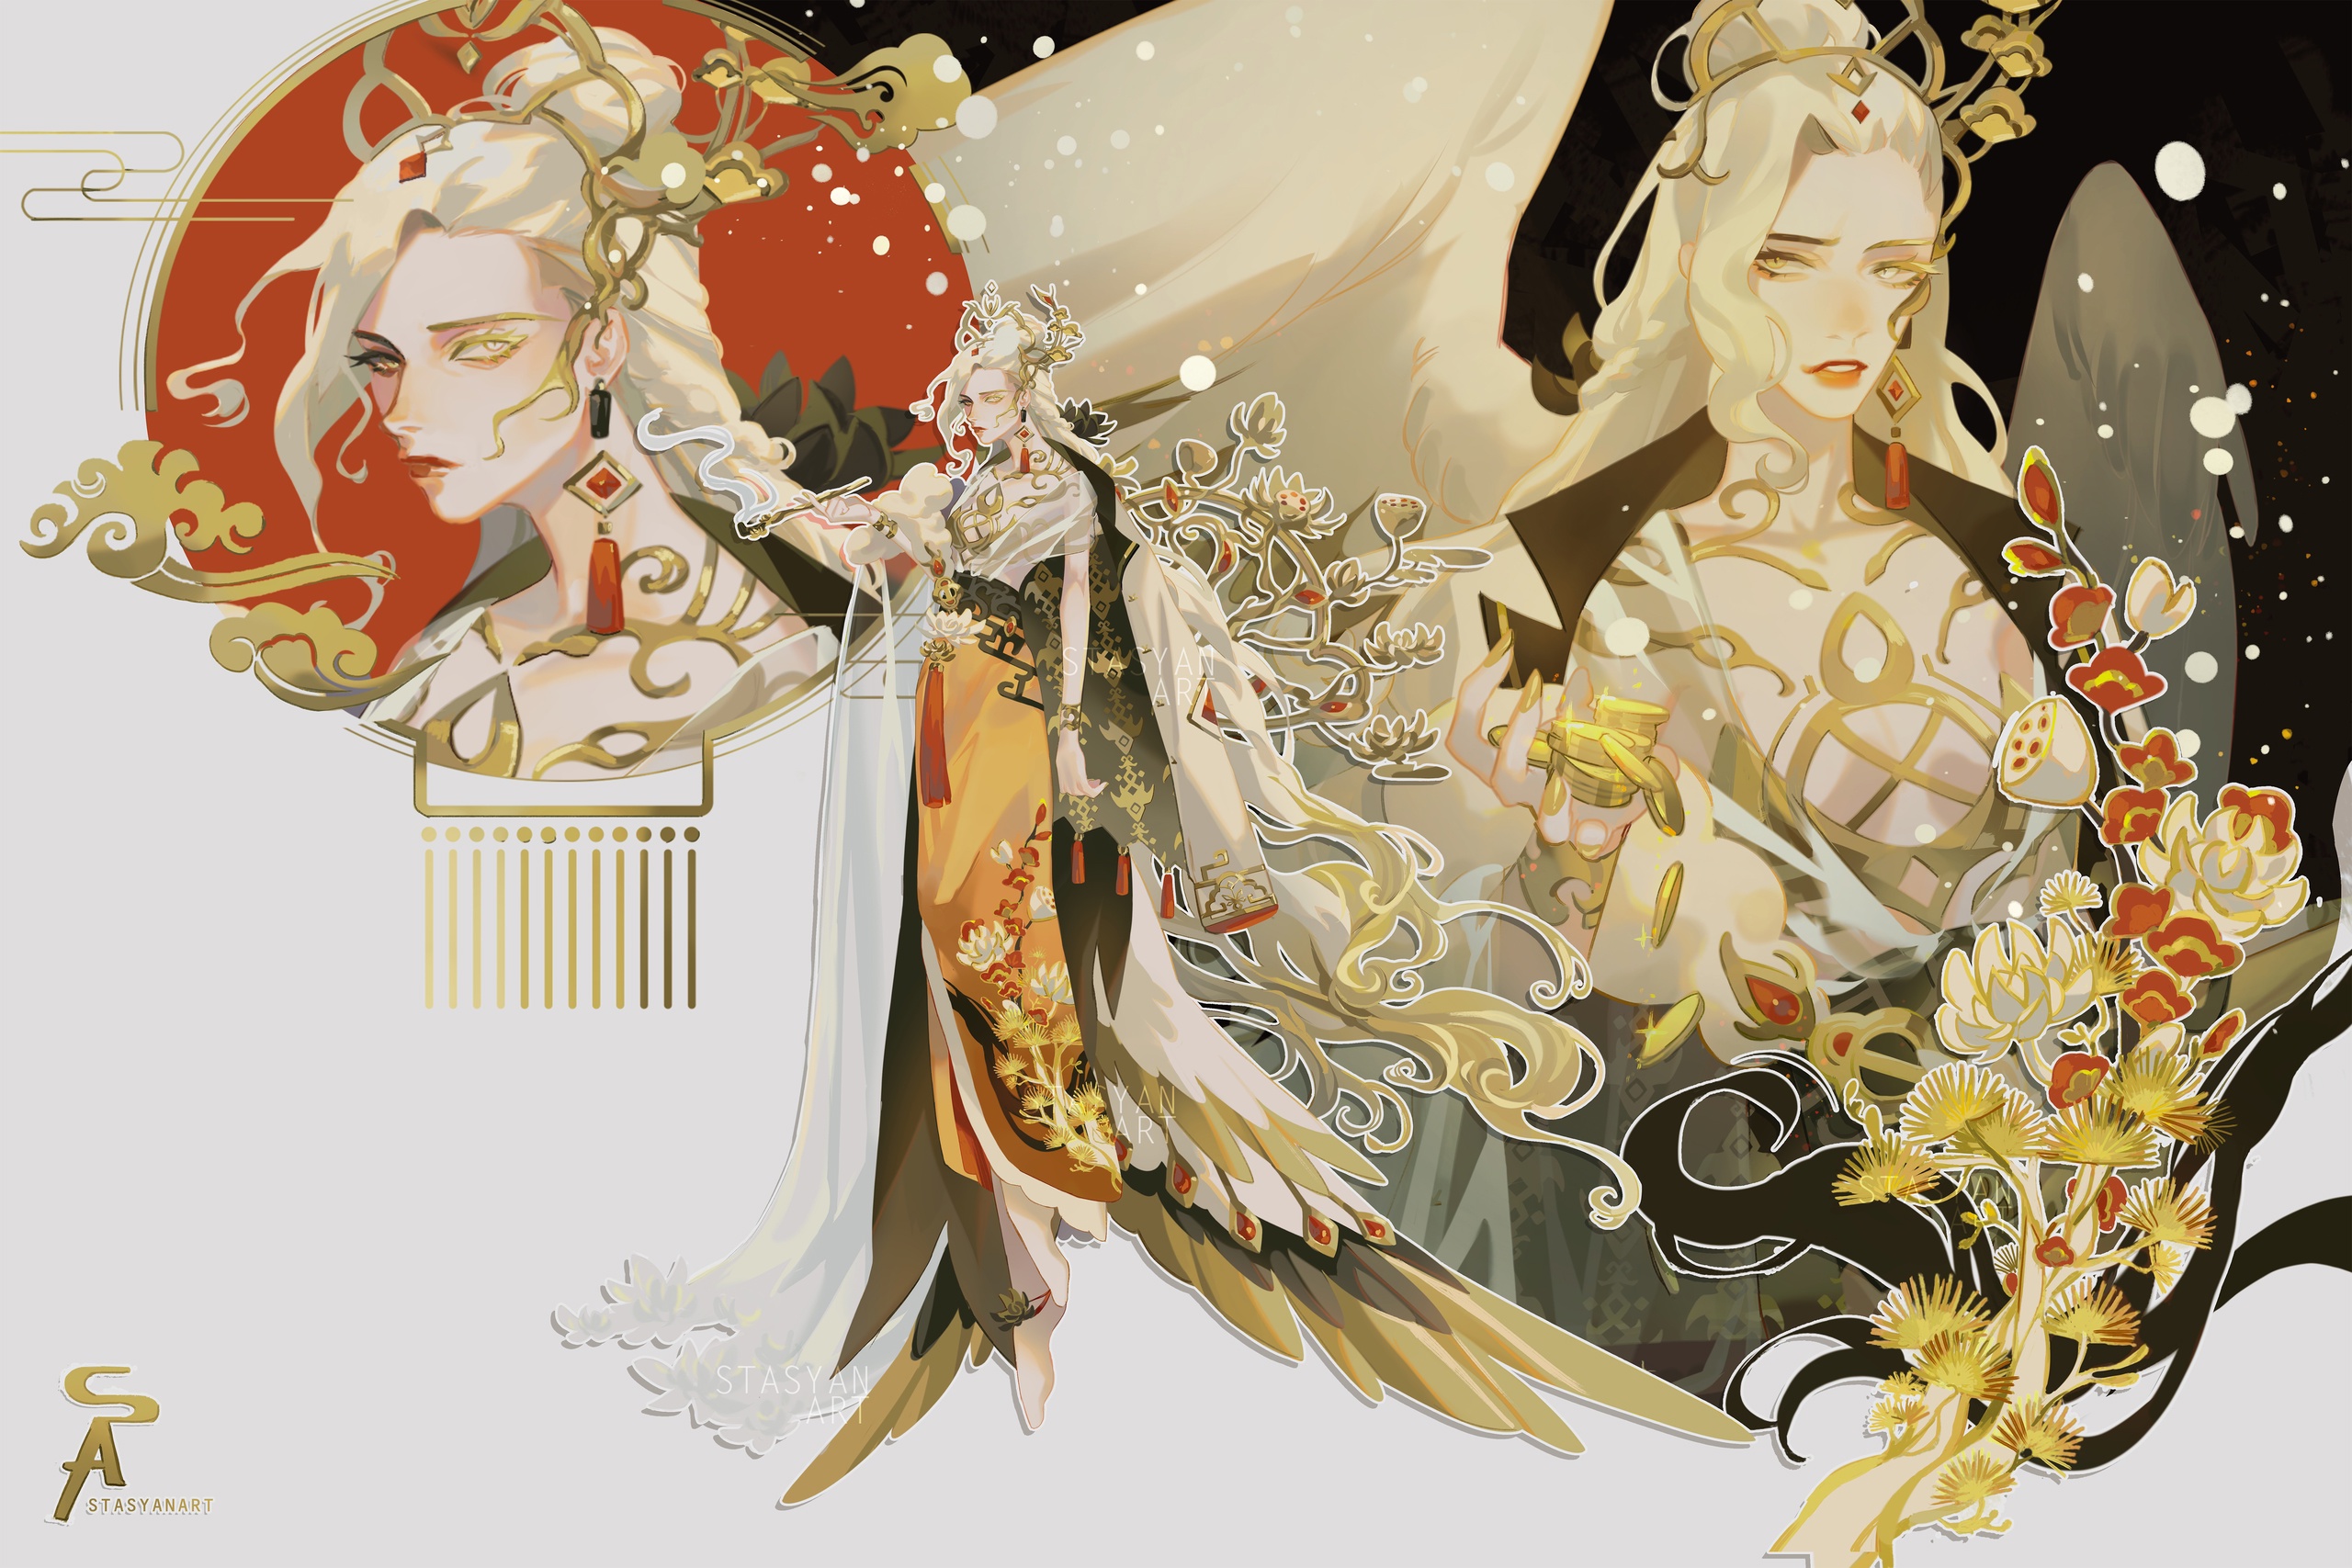 The Goddess of wealth-a Golden Lotus|Adopt|CLOSED by StasyanArt on ...